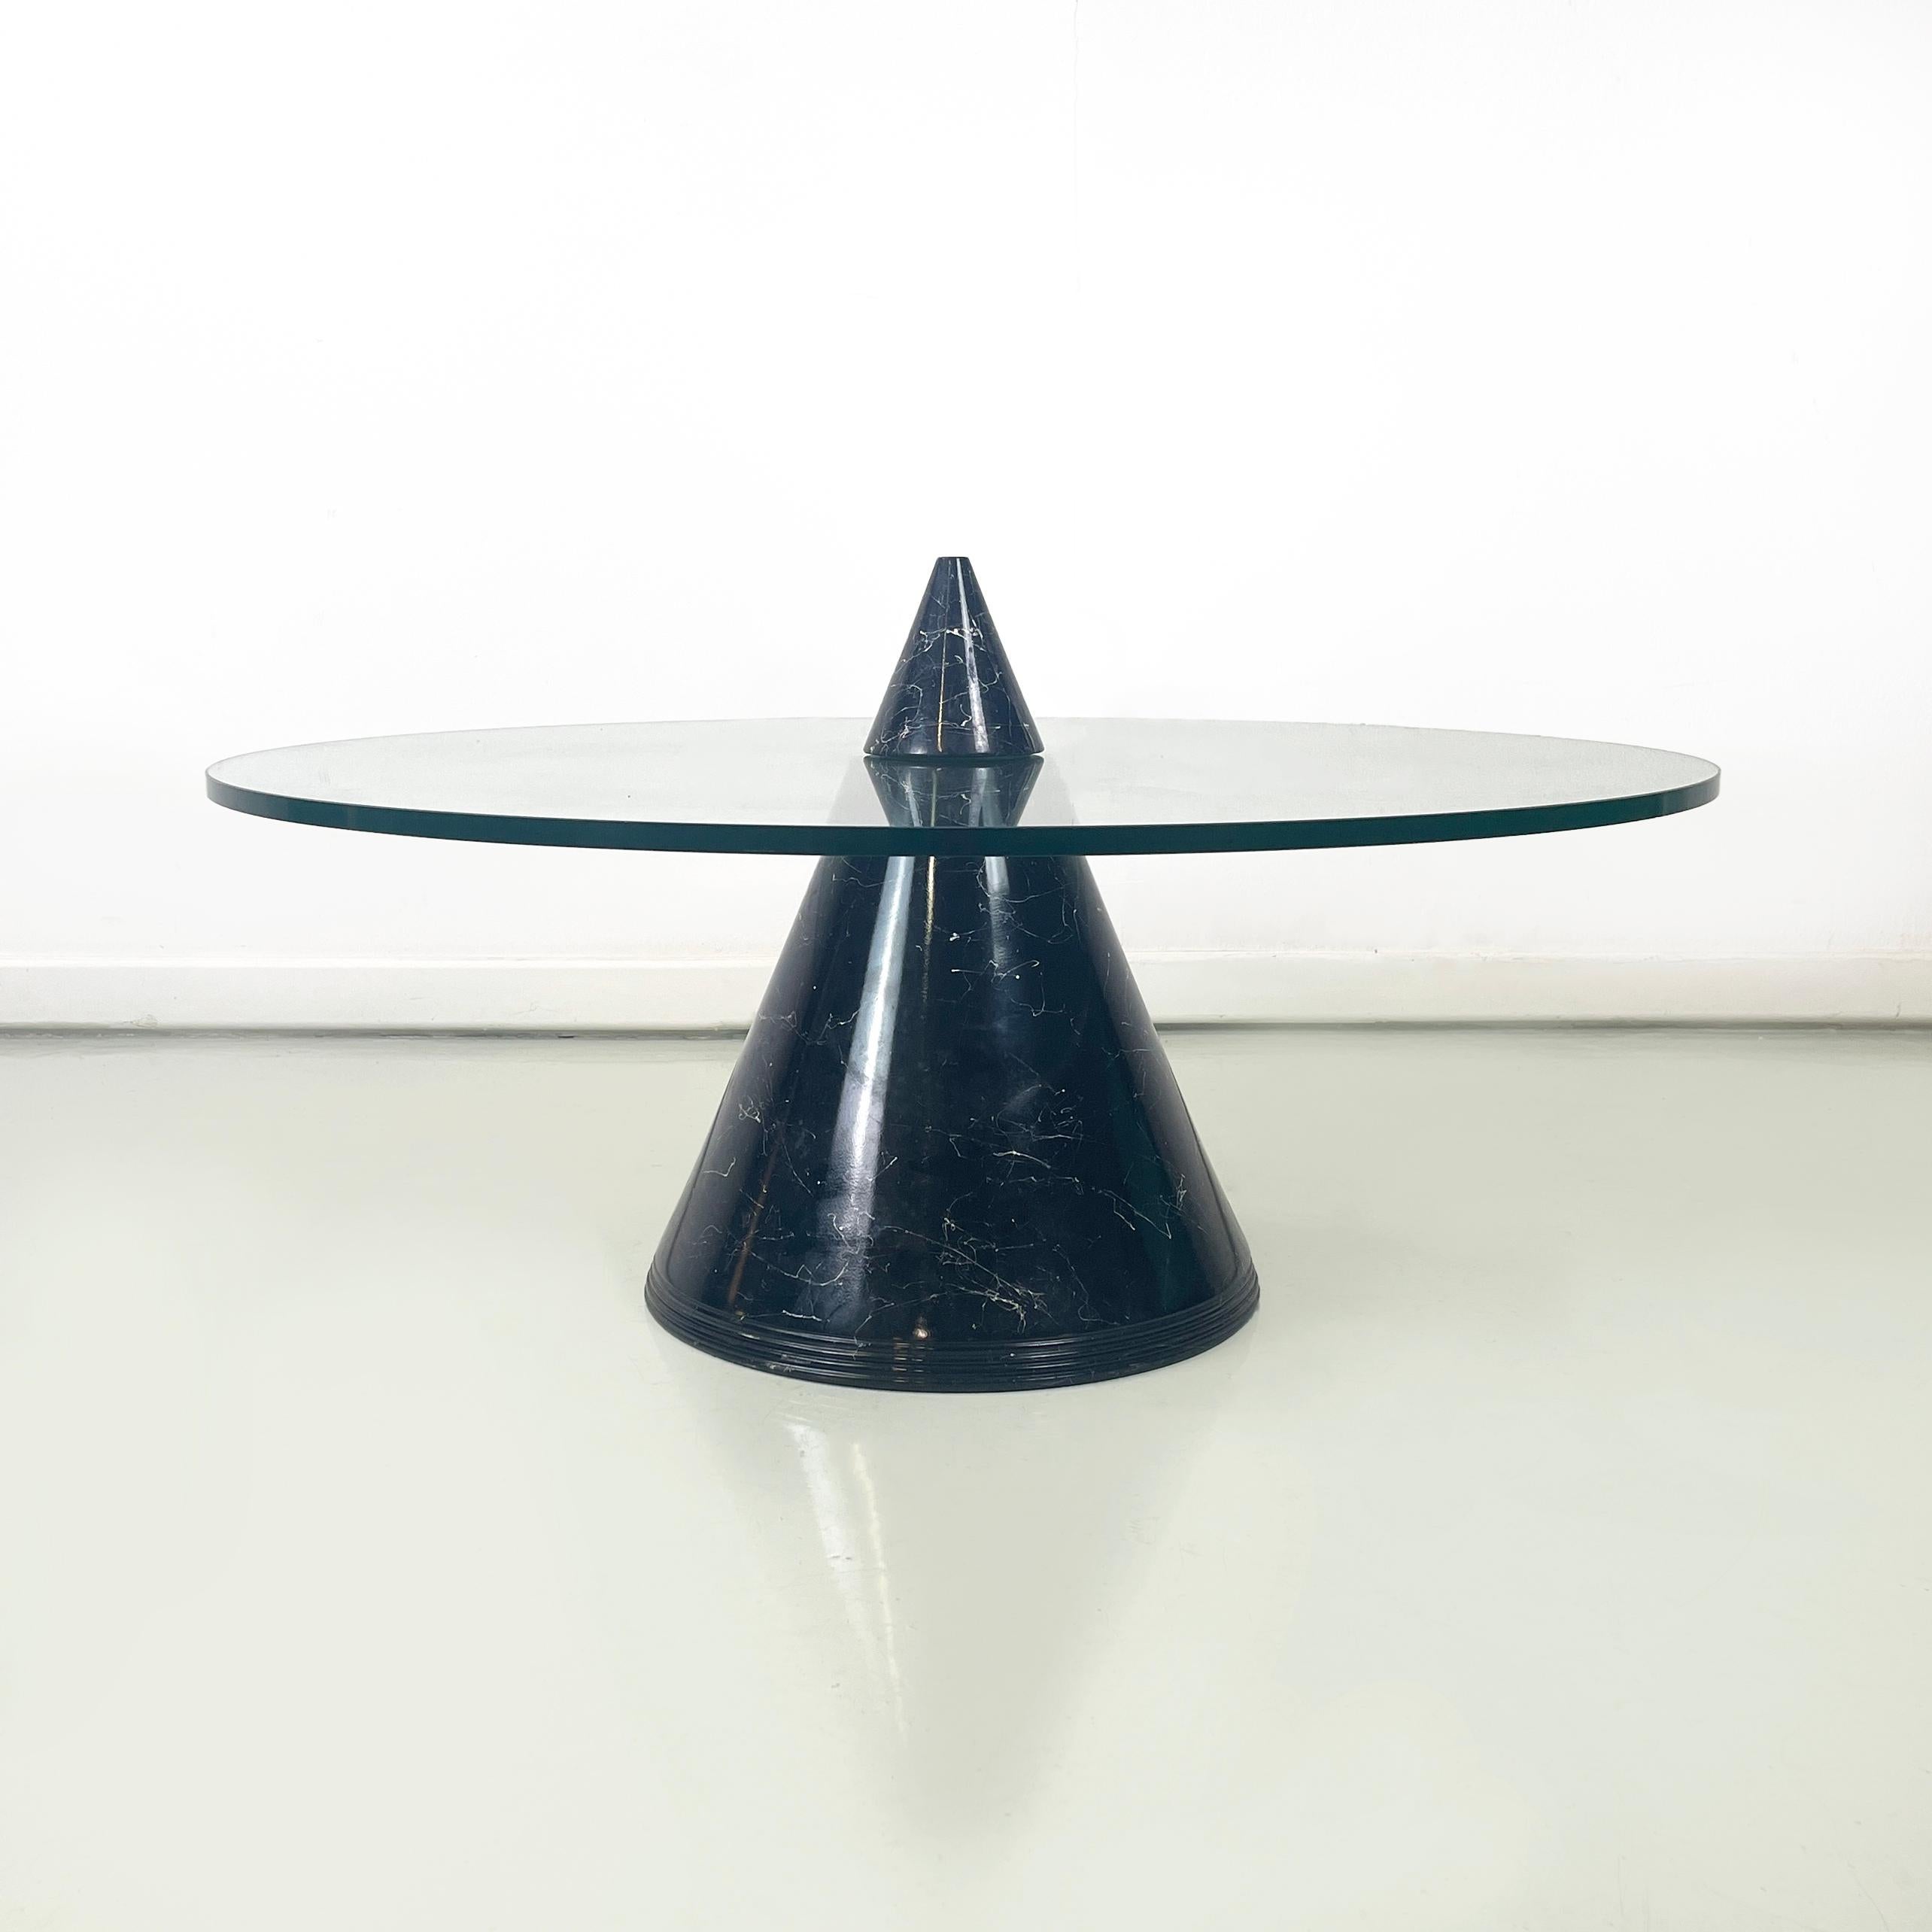 Italian modern Round coffe table in glass with black marble conical base, 1980s
Coffee table with thick round glass top. The conical structure, which is divided in half by the top, is covered in black marble.
1980 approx.
Vintage condition. The top